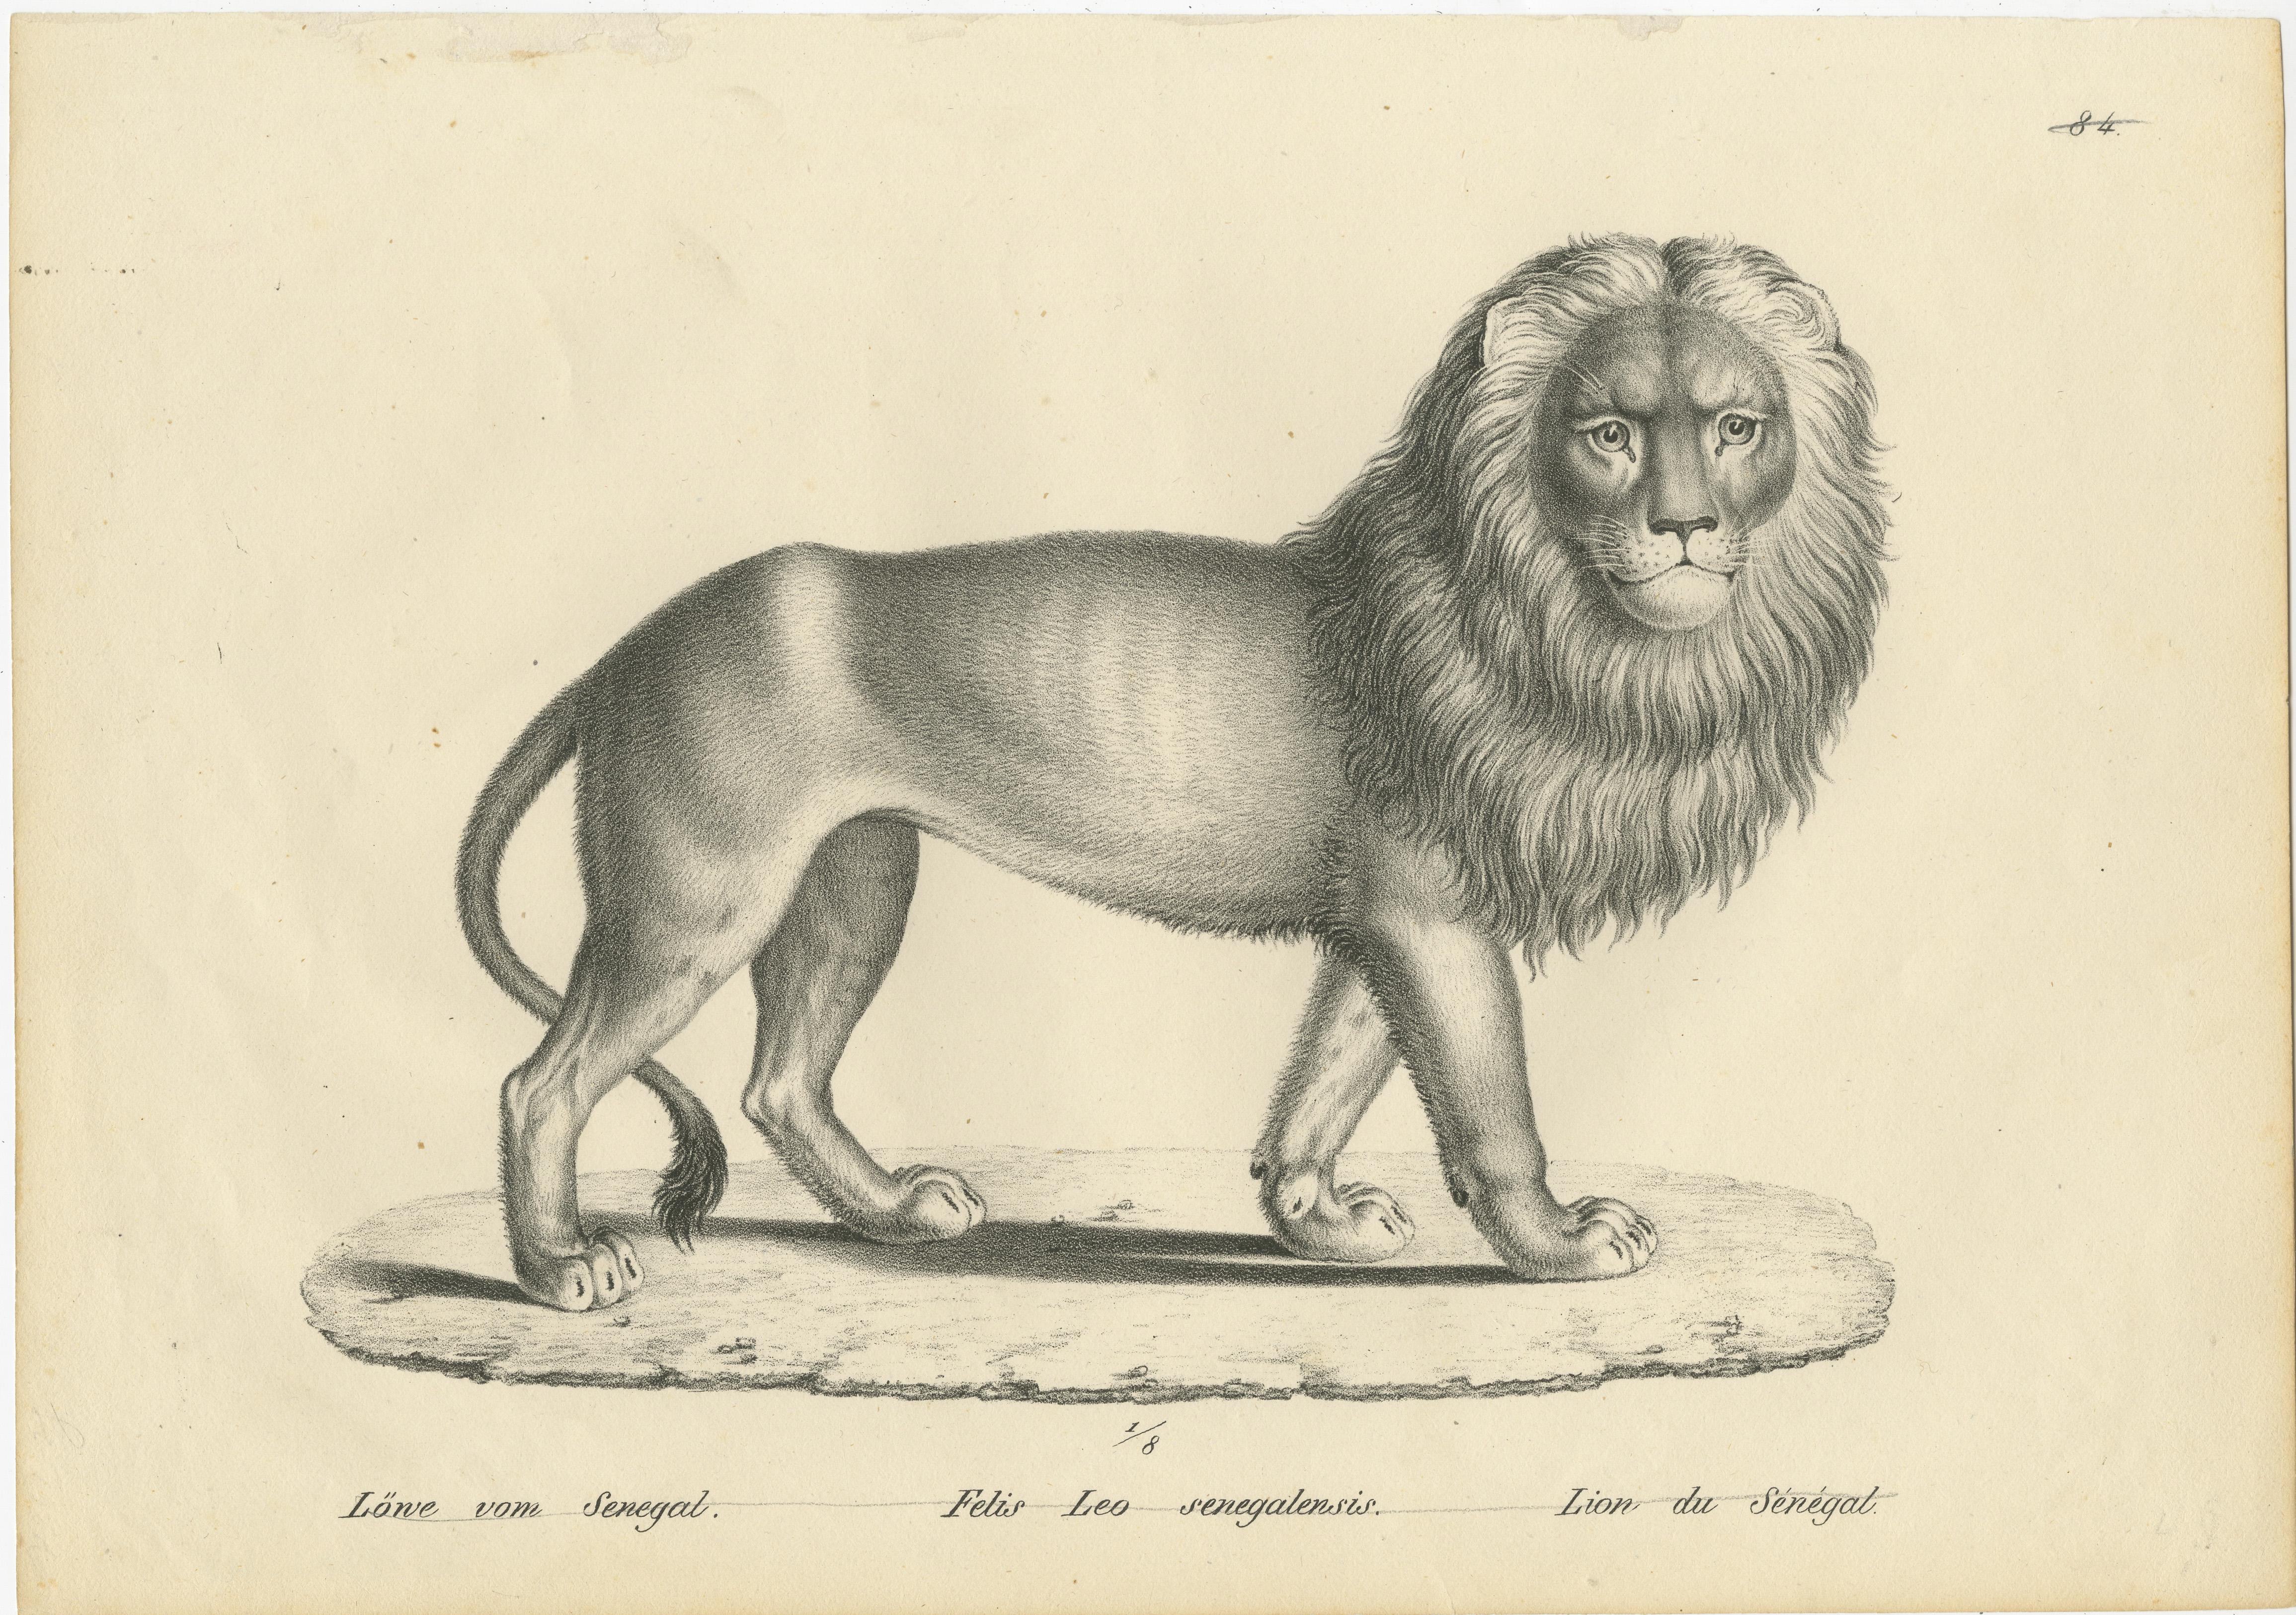 The 'Löwe vom Senegal' is an original antique print by Karl Joseph Brodtmann, dating back to around 1830. This artwork captures the grandeur of a Senegal lion, rendered in a style typical of the natural history illustrations from that era. 

The